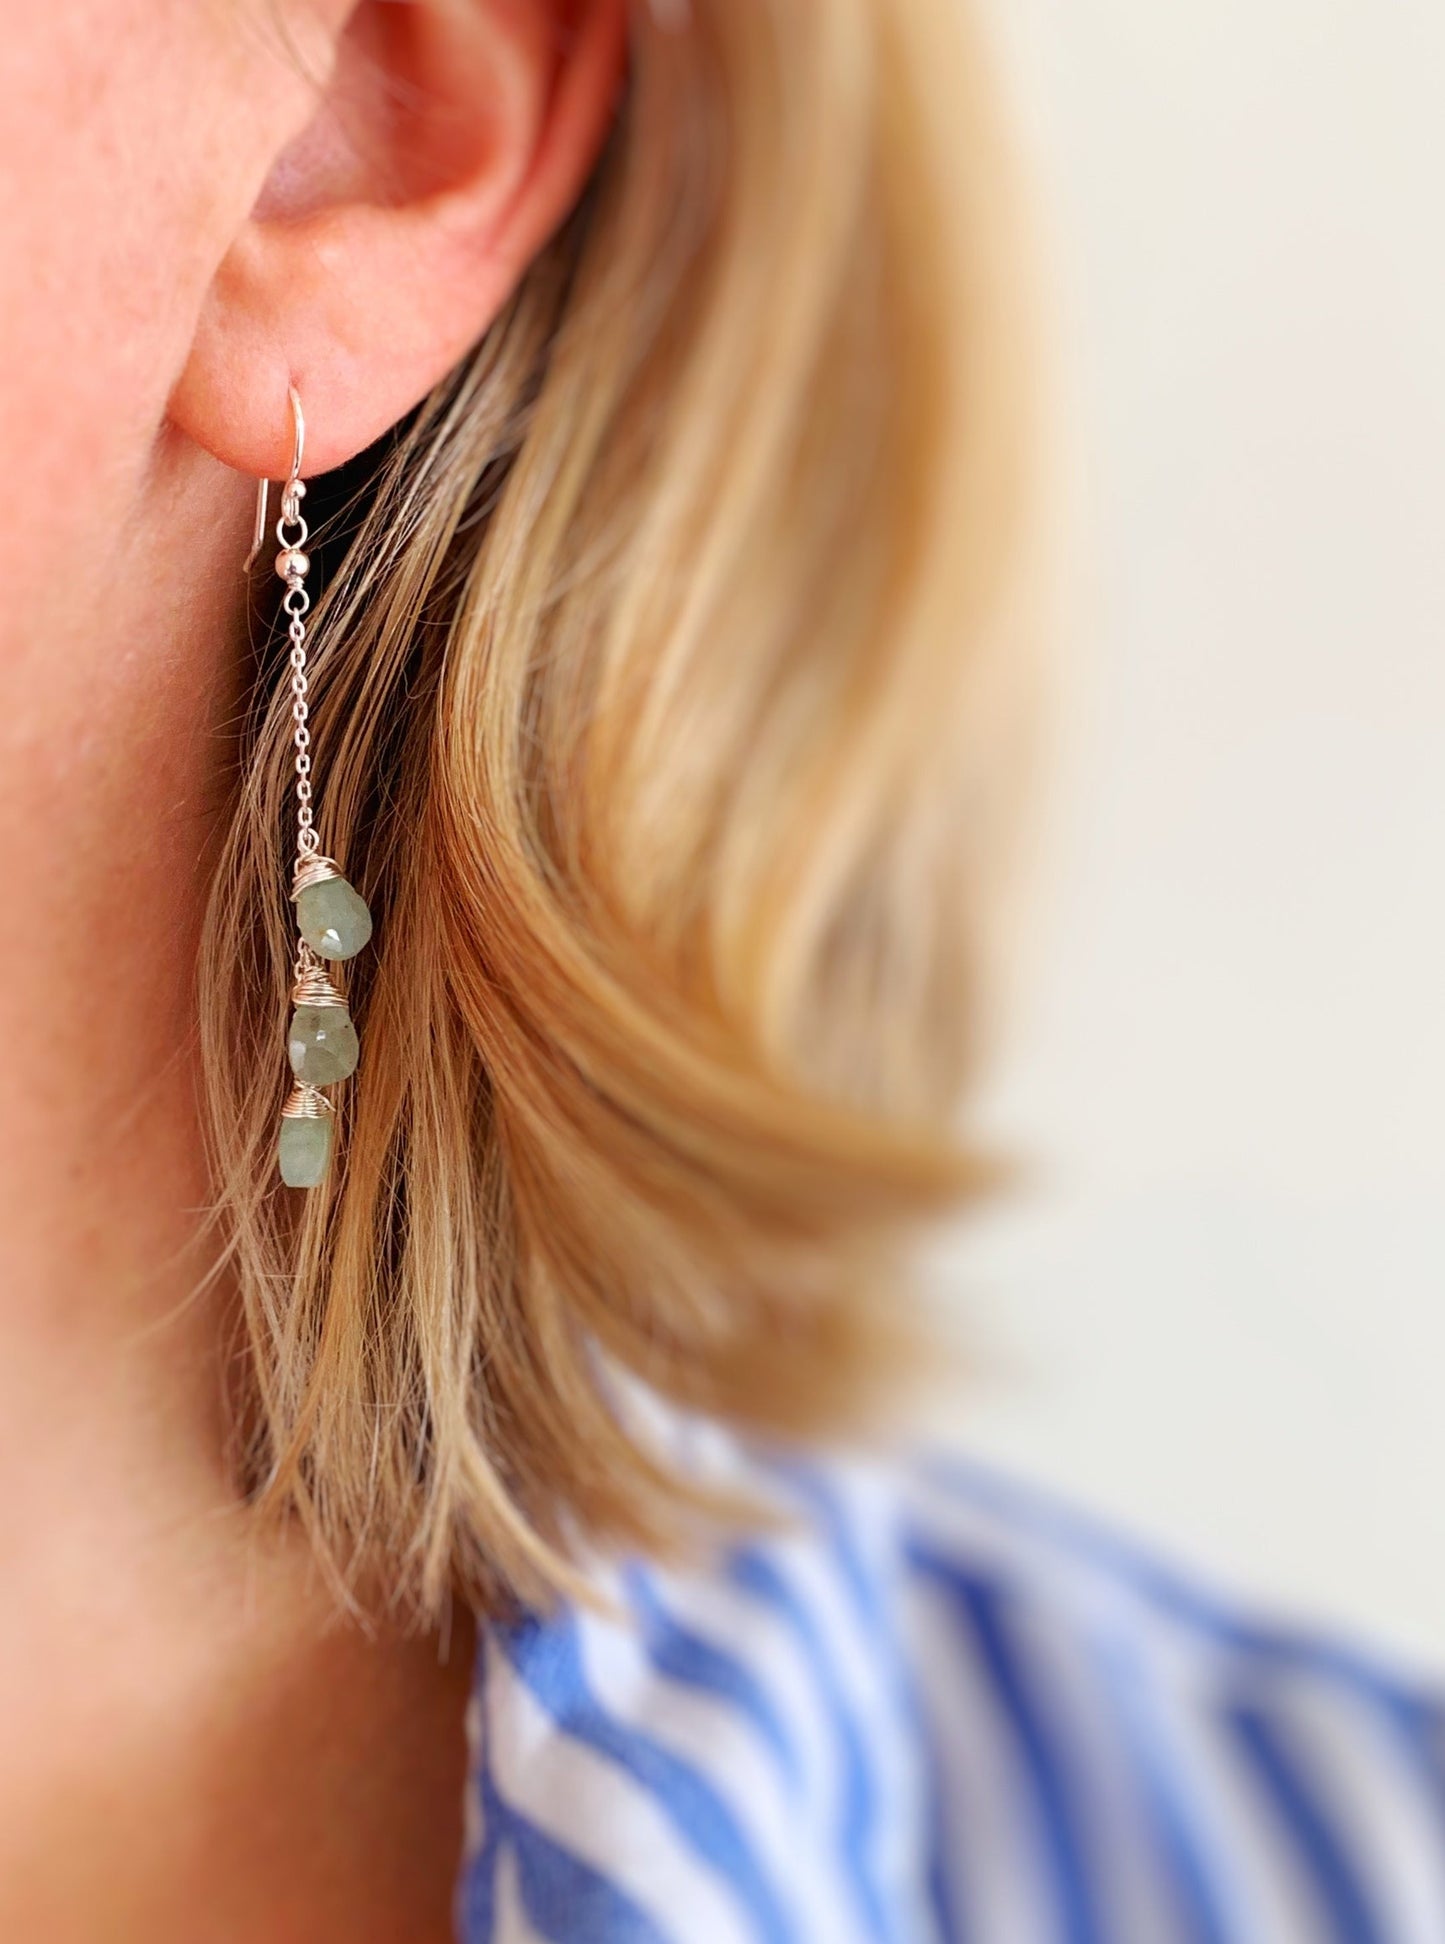 This is an image of a person wearing the raindrop earring to show wearability